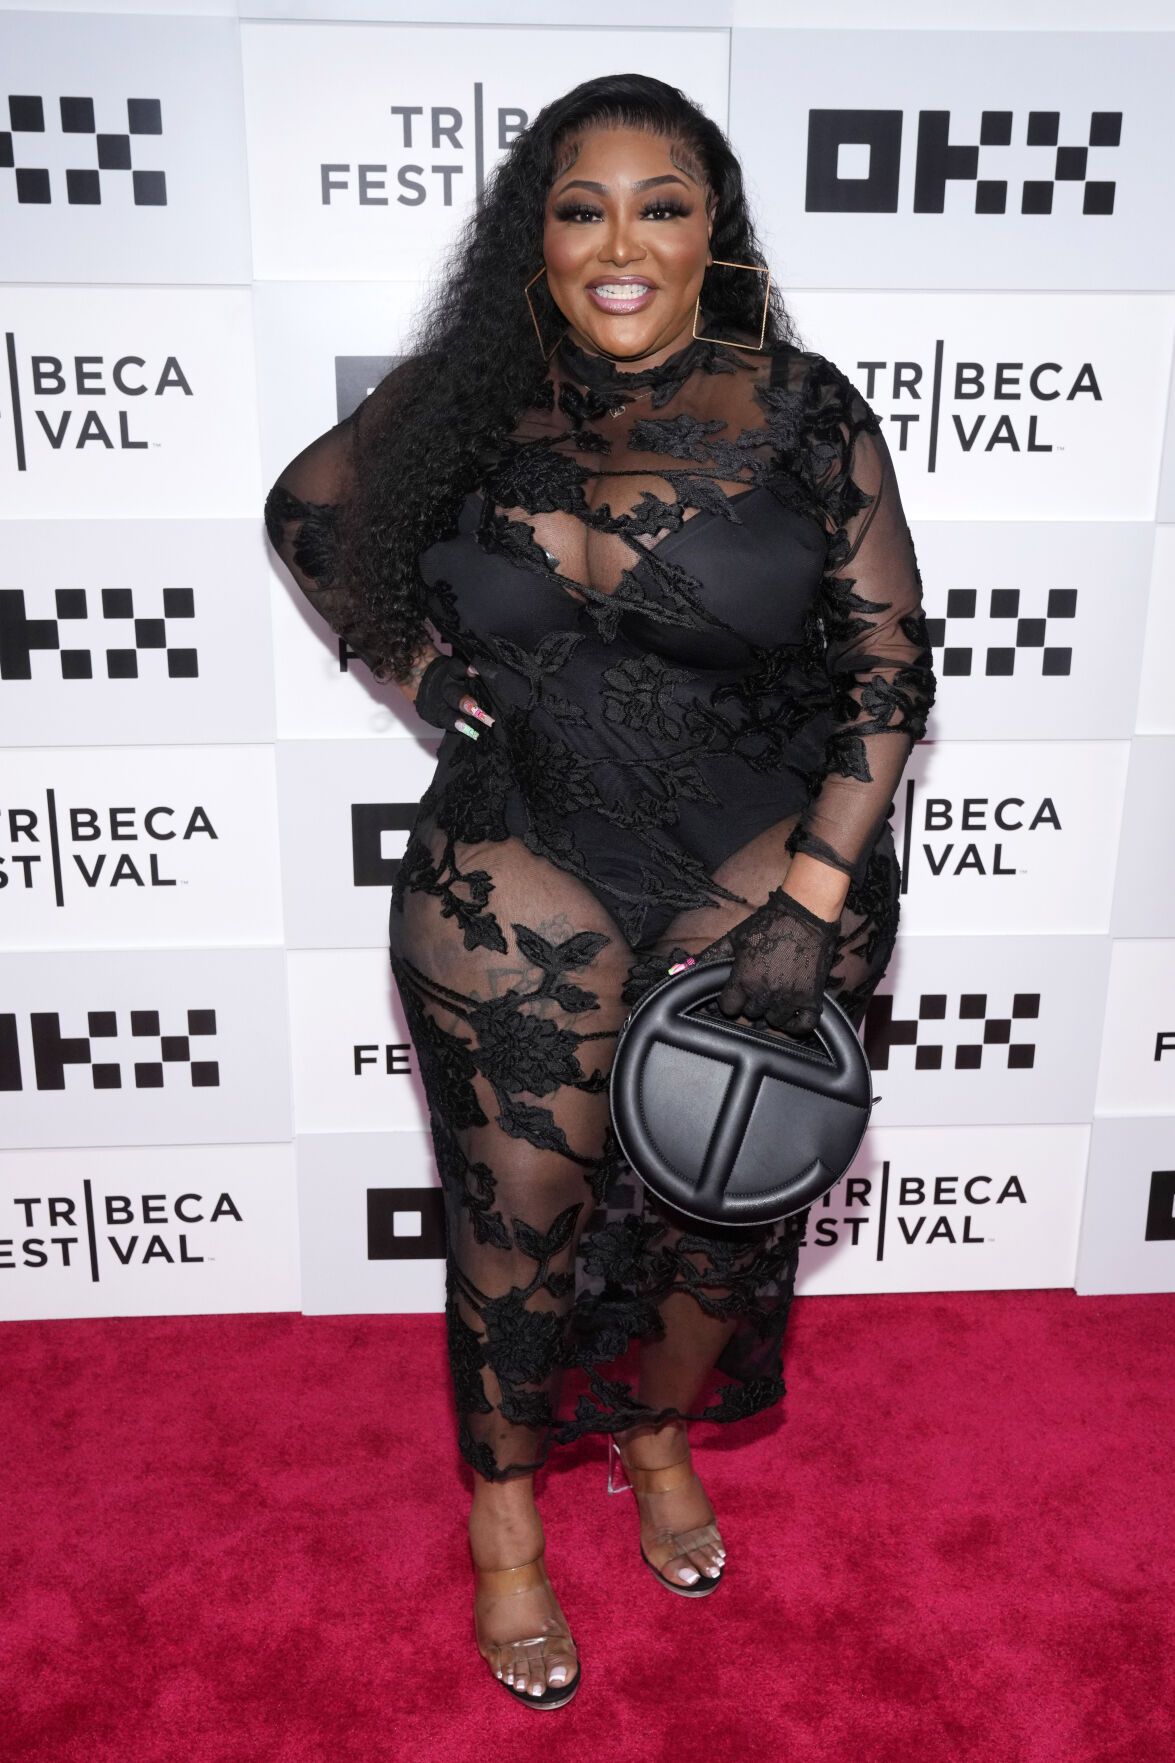 Ts Madison attends "The Perfect Find" premiere during the 2023 Tribeca Festival at BMCC Theater on June 14, 2023 in New York City.